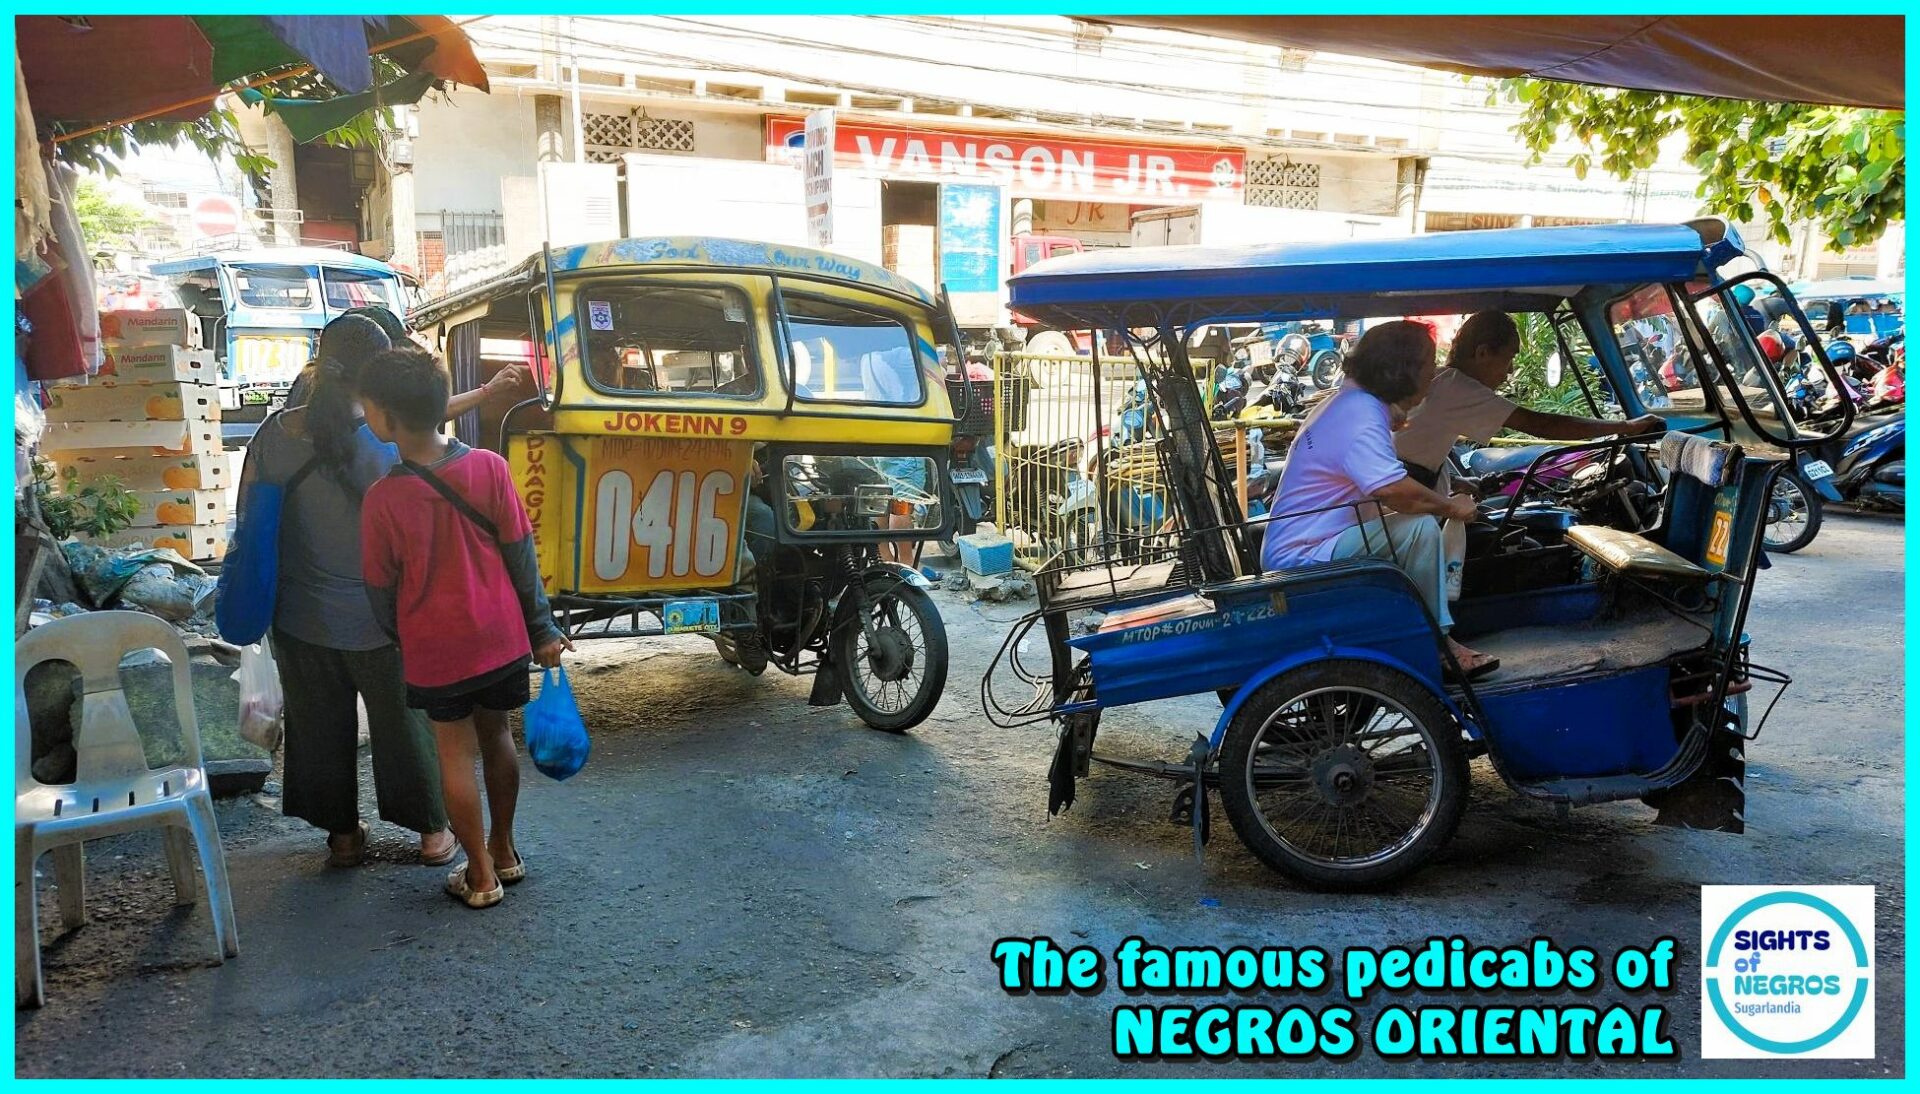 SIGHTS OF NEGROS - PHOTO OF THE DAY - Vibrant Life at the Dumaguete Public Market: A Pedicab Portrait